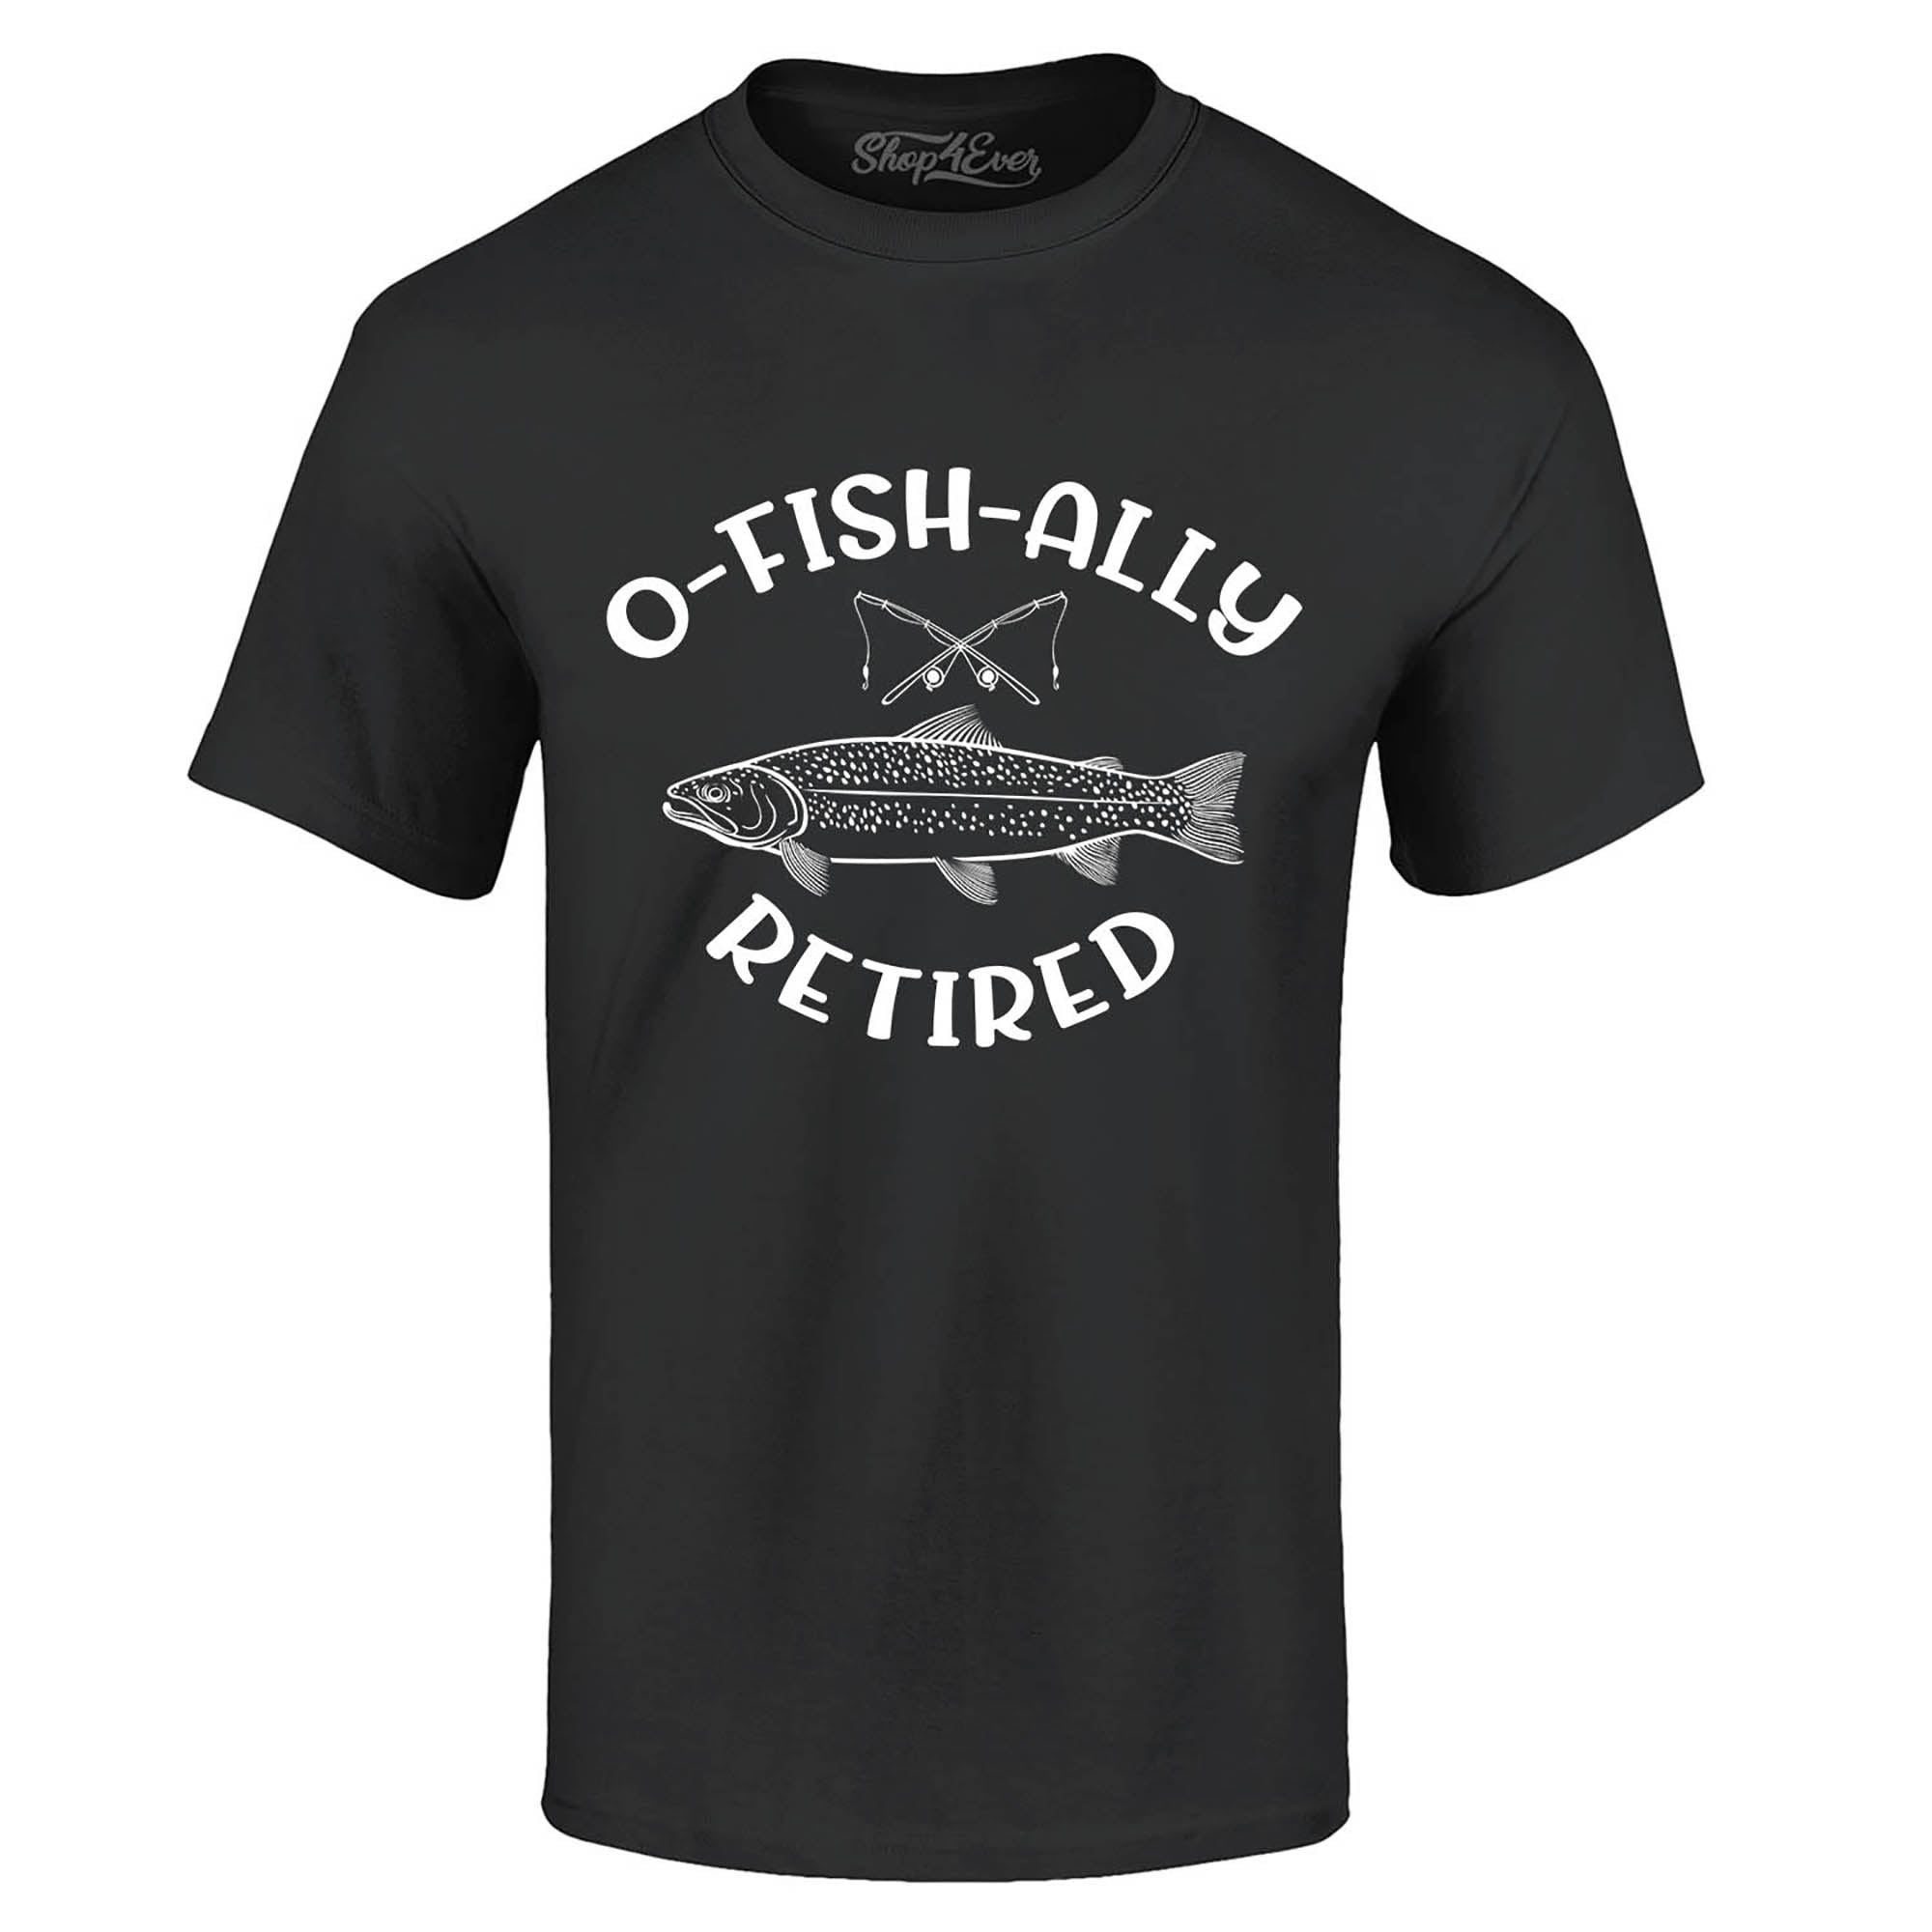 O Fish Ally Retired T-Shirt